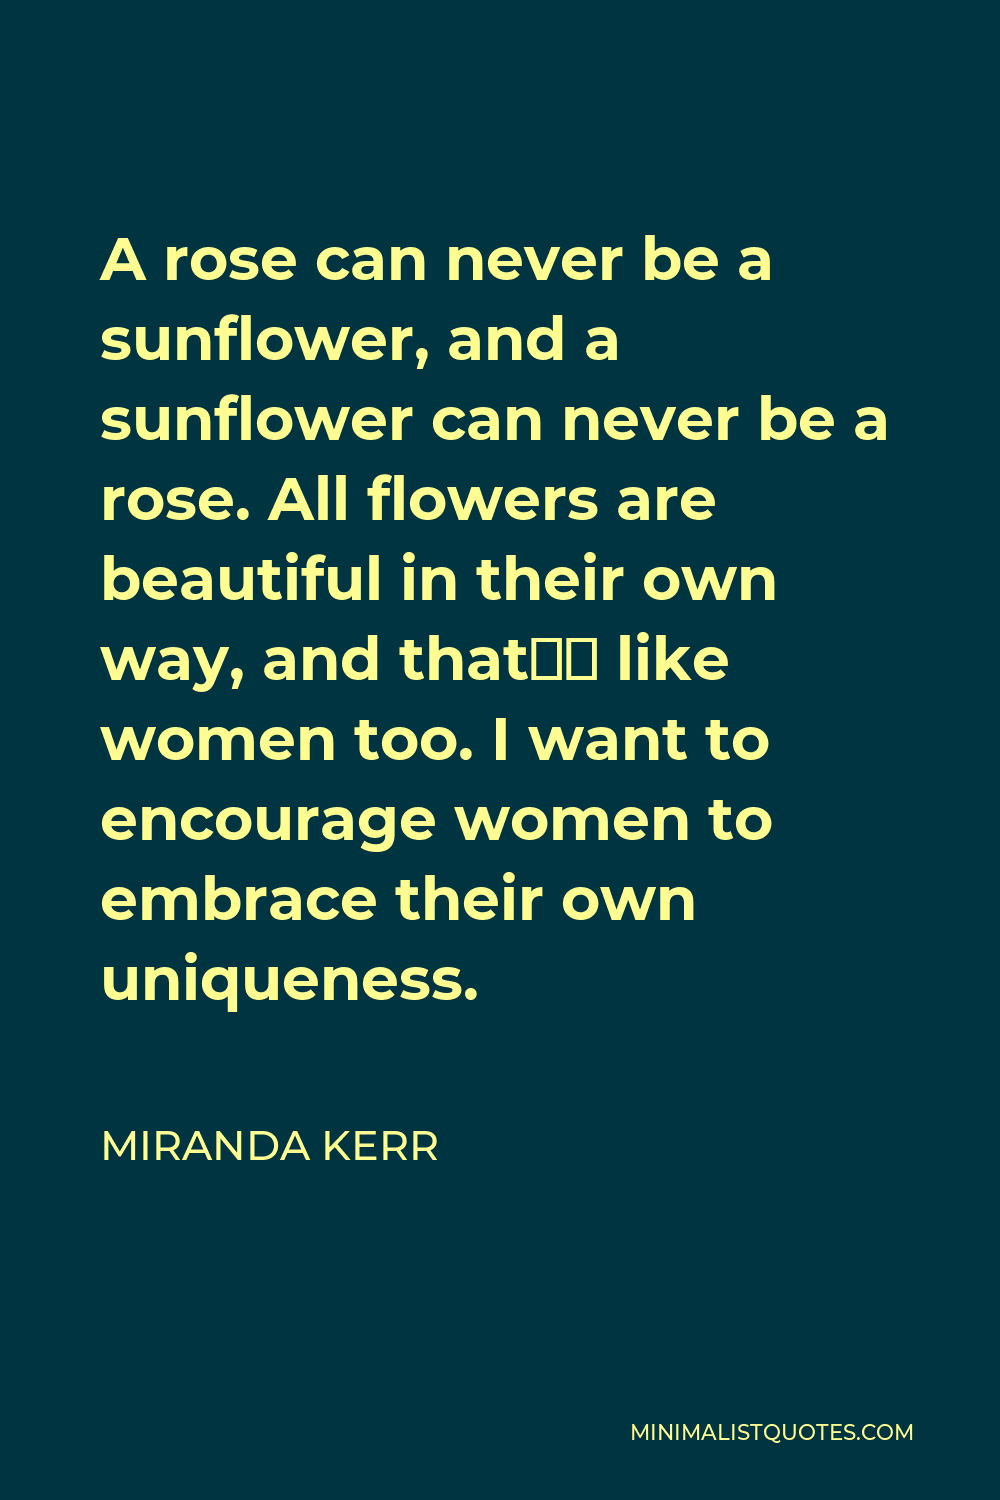 Miranda Kerr Quote - A rose can never be a sunflower, and a sunflower can never be a rose. All flowers are beautiful in their own way, and that’s like women too. I want to encourage women to embrace their own uniqueness.